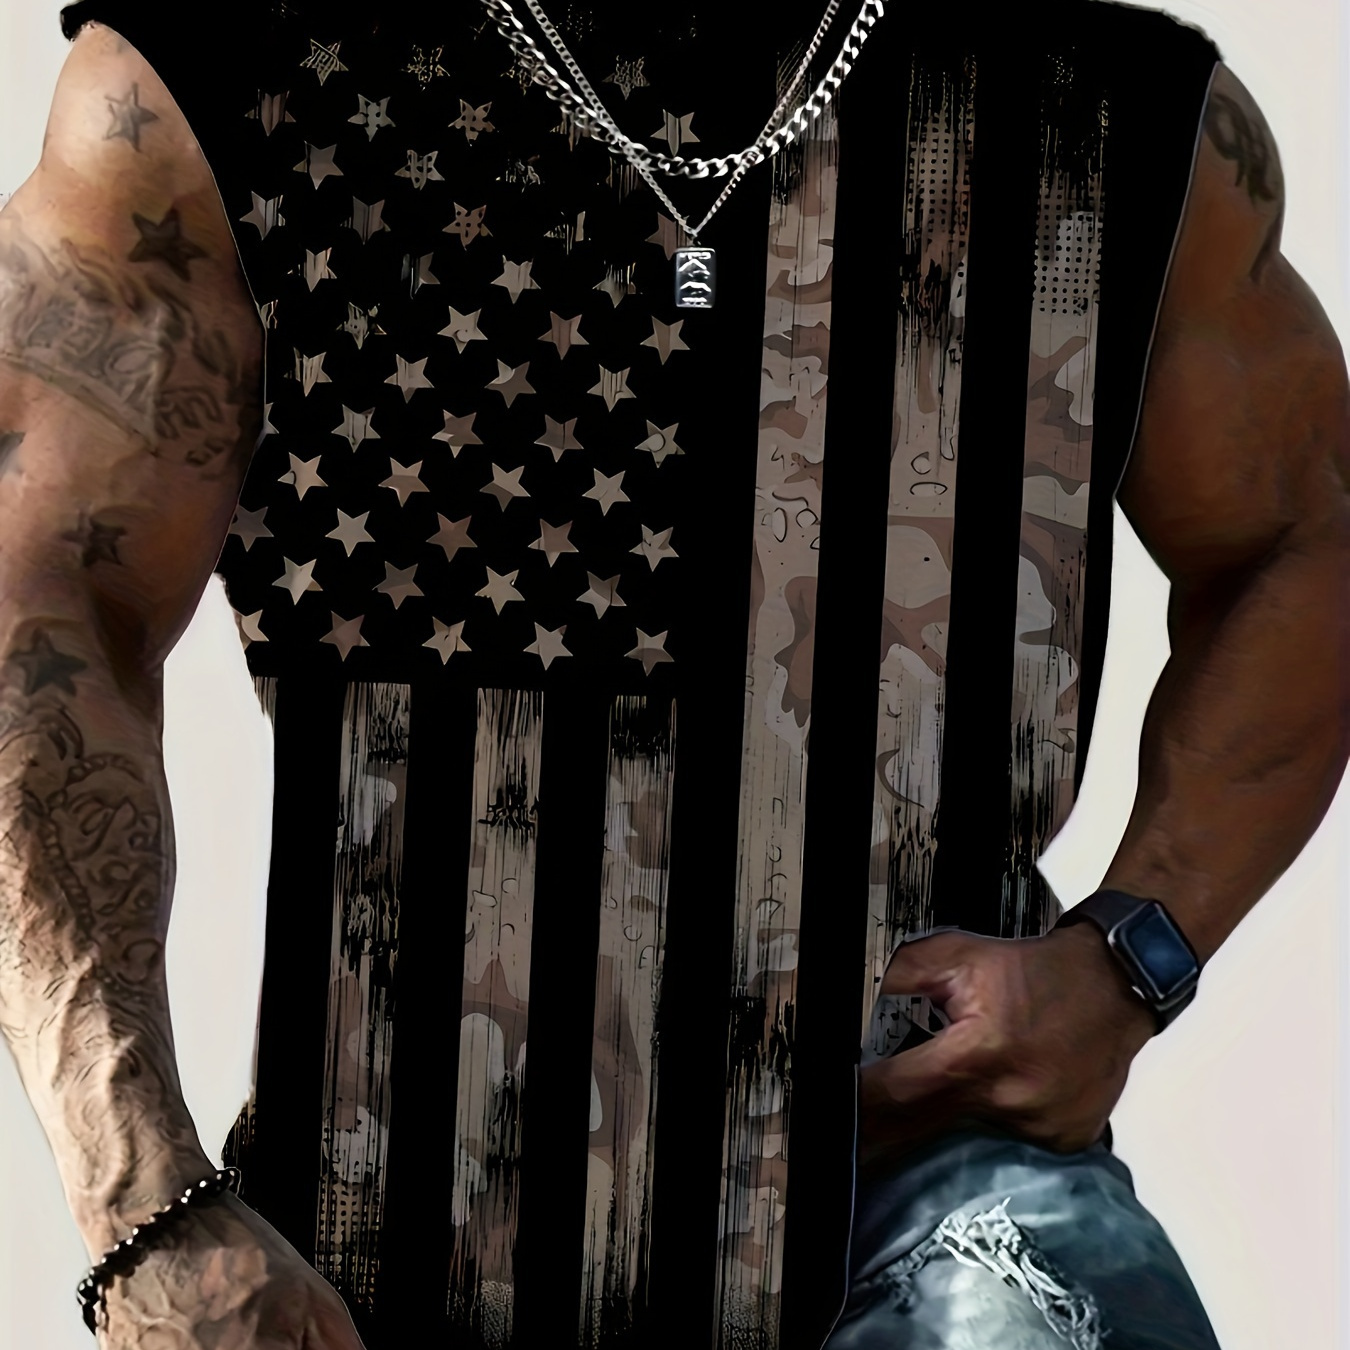 

Flag Print Comfy Breathable Tank Top, Men's Casual Stretch Sleeveless T-shirt For Summer Gym Workout Training Basketball